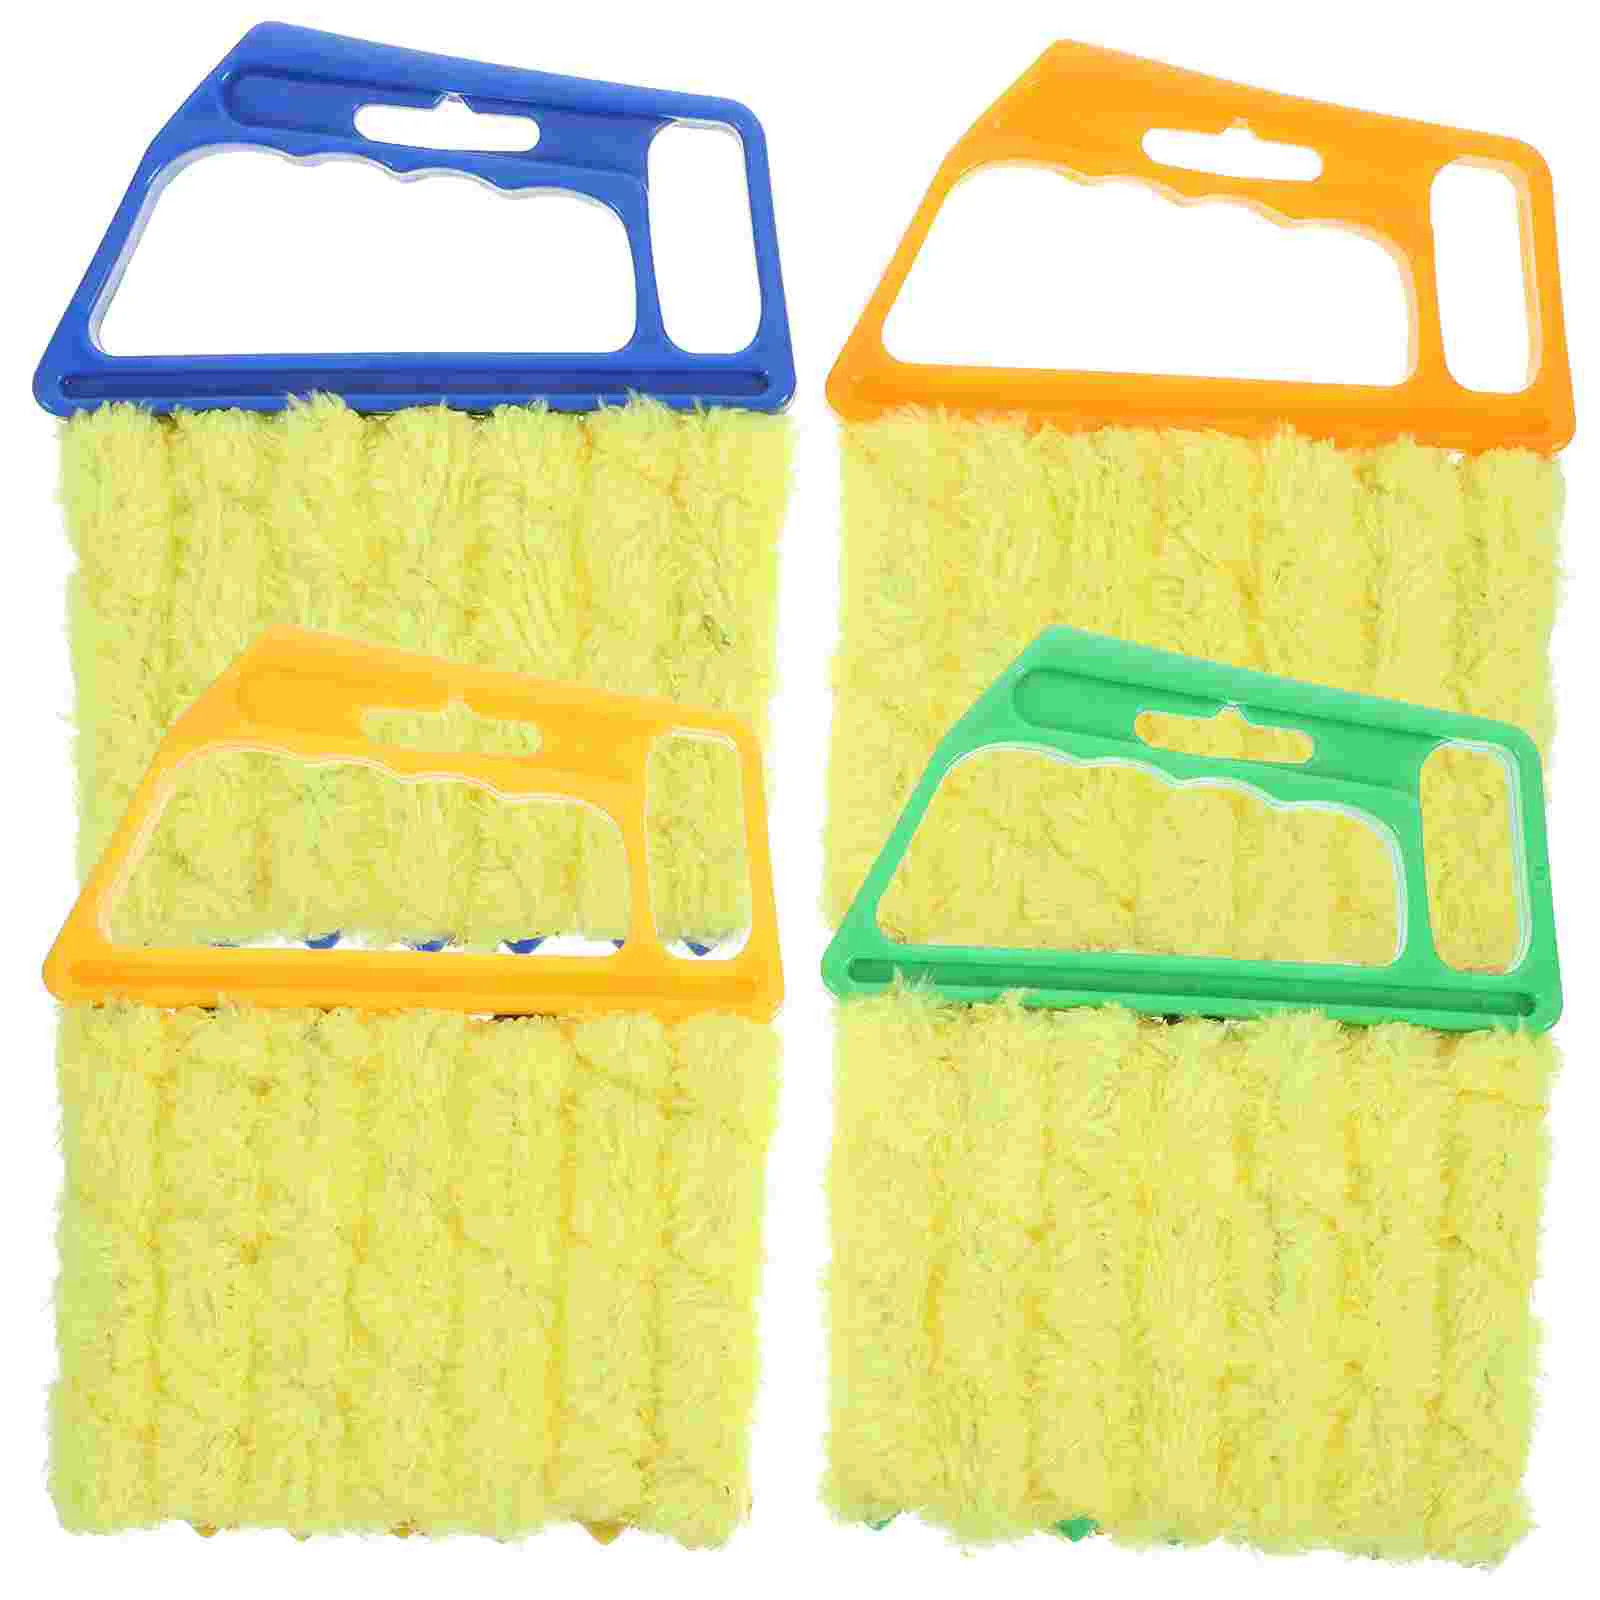 

4 Pcs Air Conditioning Cleaning Brush Car Outlet Blinds Duster for Window Cleaner Furniture Protector Plastic Tool